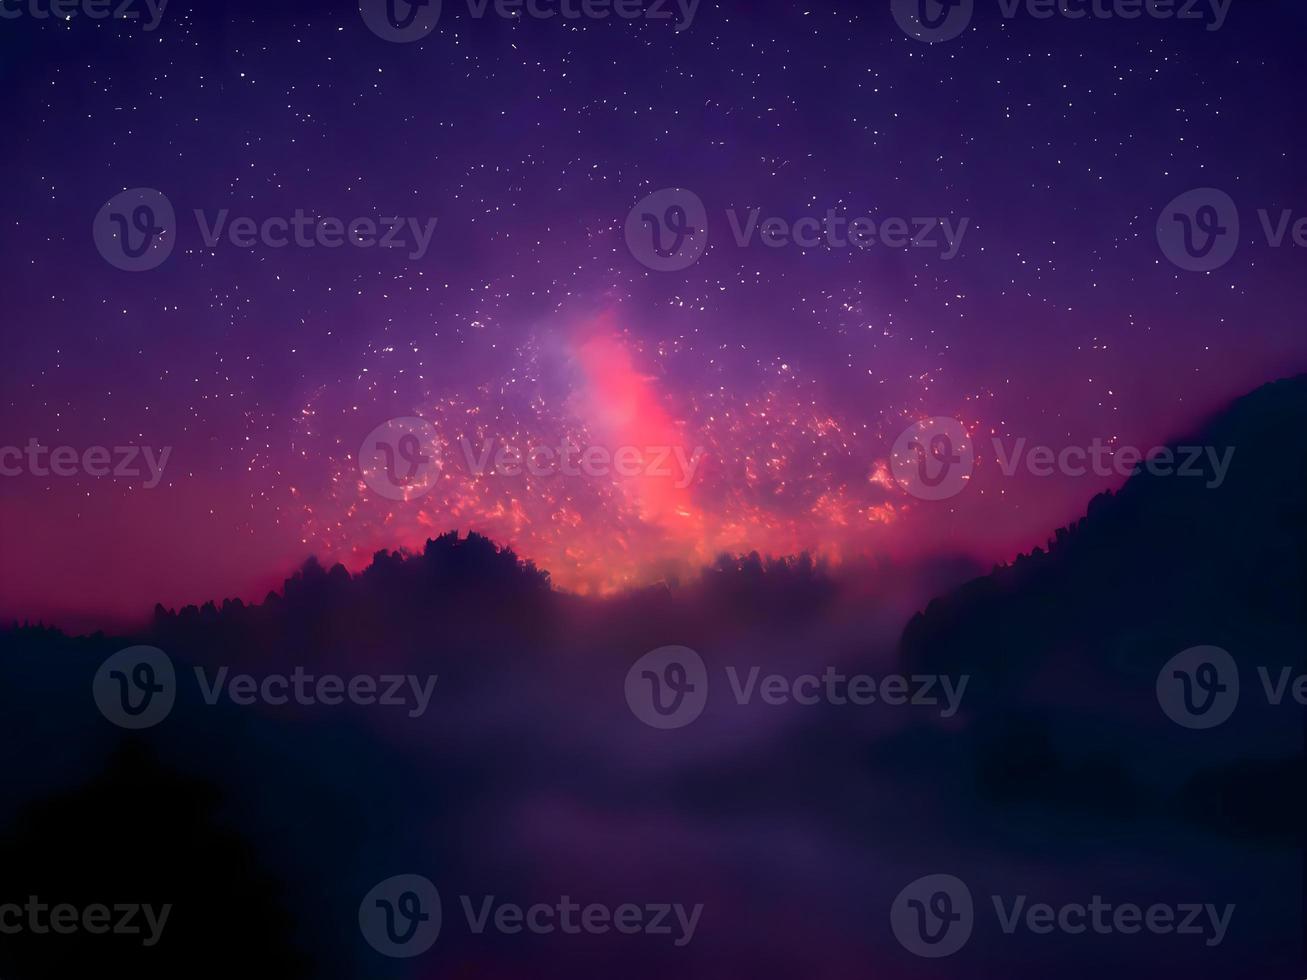 Milky Way and pink light at mountains. Night colorful landscape. Starry sky with hills. Beautiful Universe. Space background with galaxy. Travel background photo